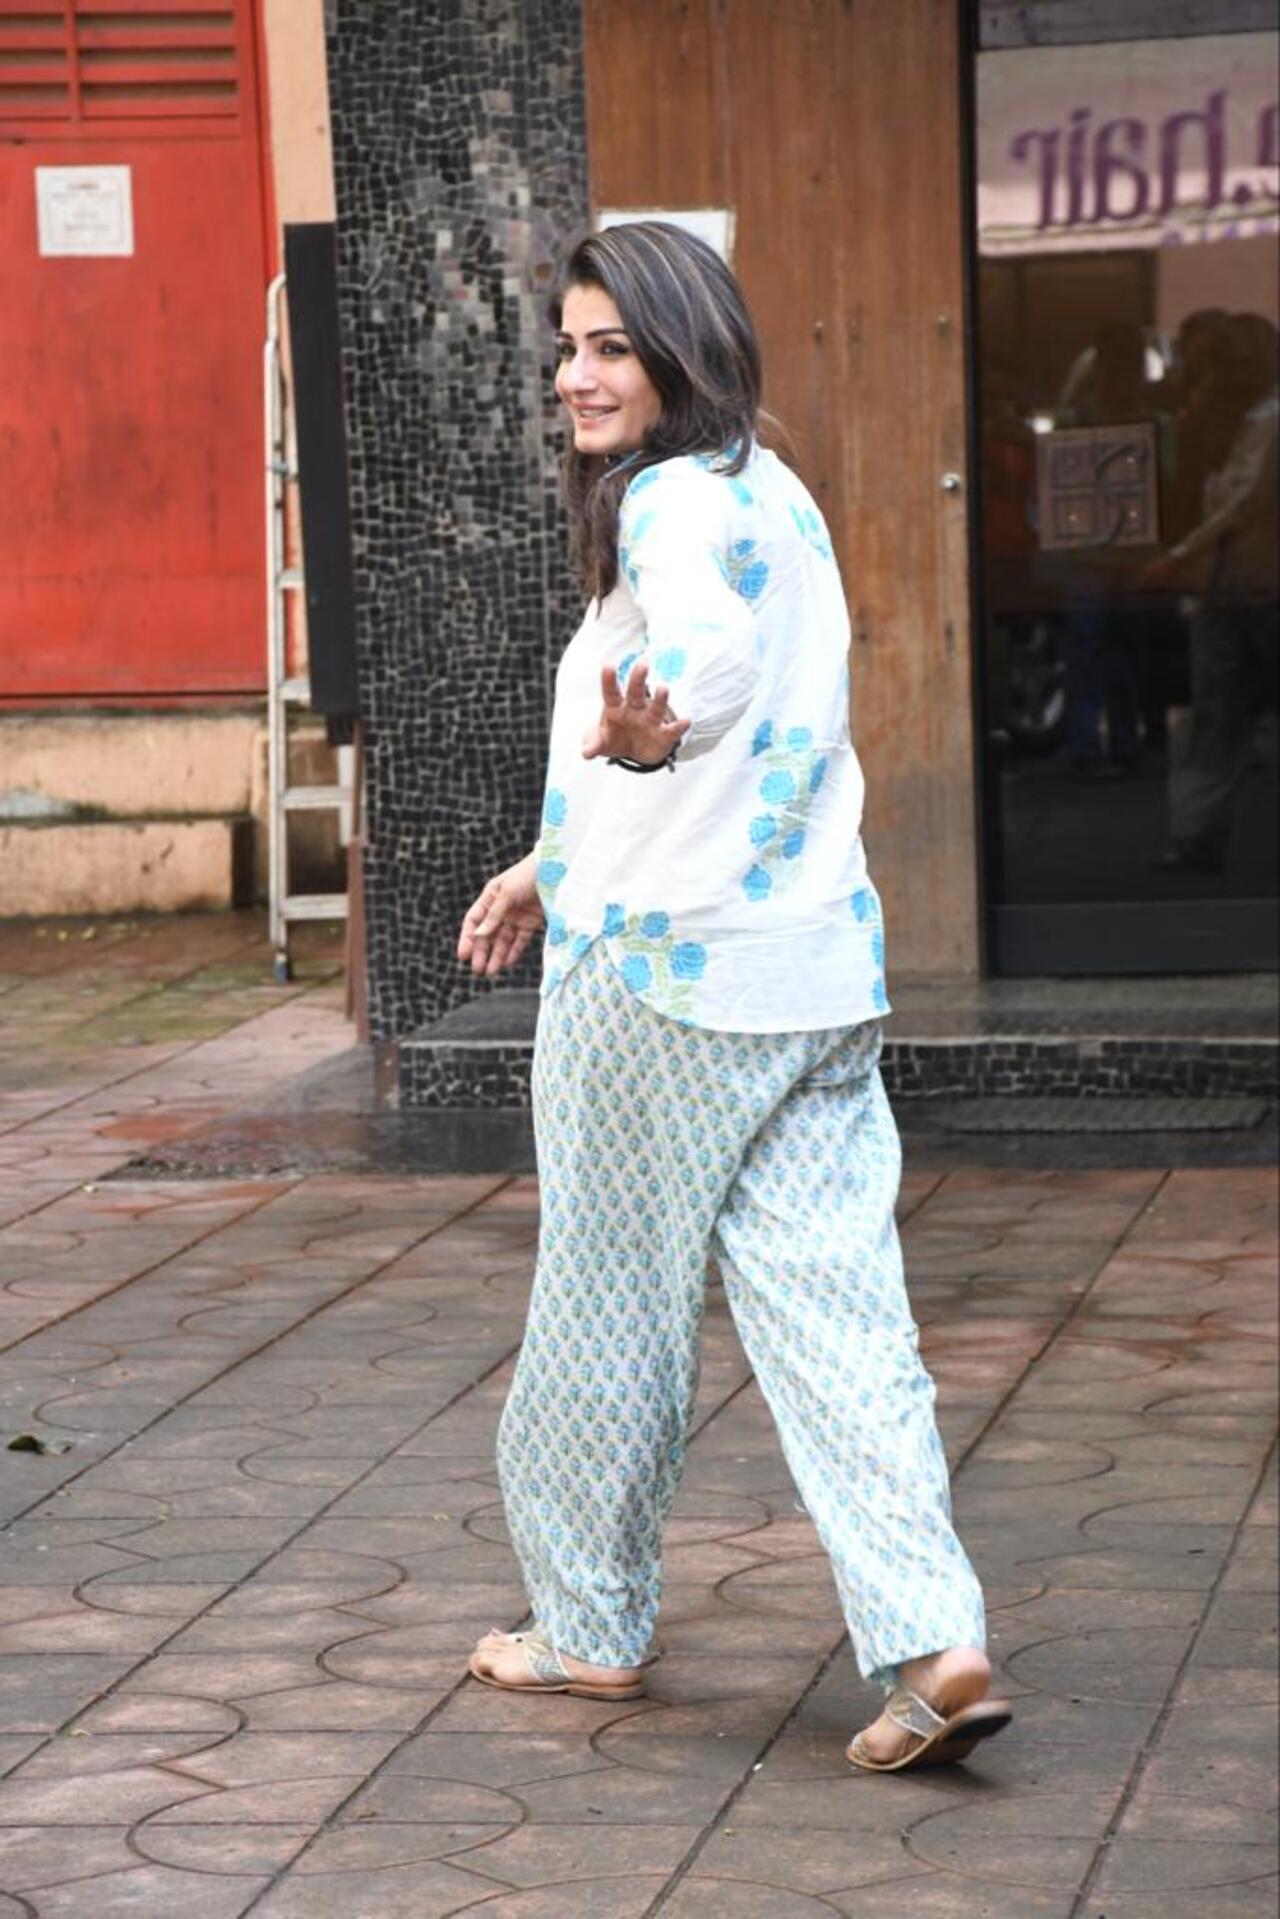 Raveena Tandon was spotted wearing a cool light coloured co-ord set as she went out and about in the city